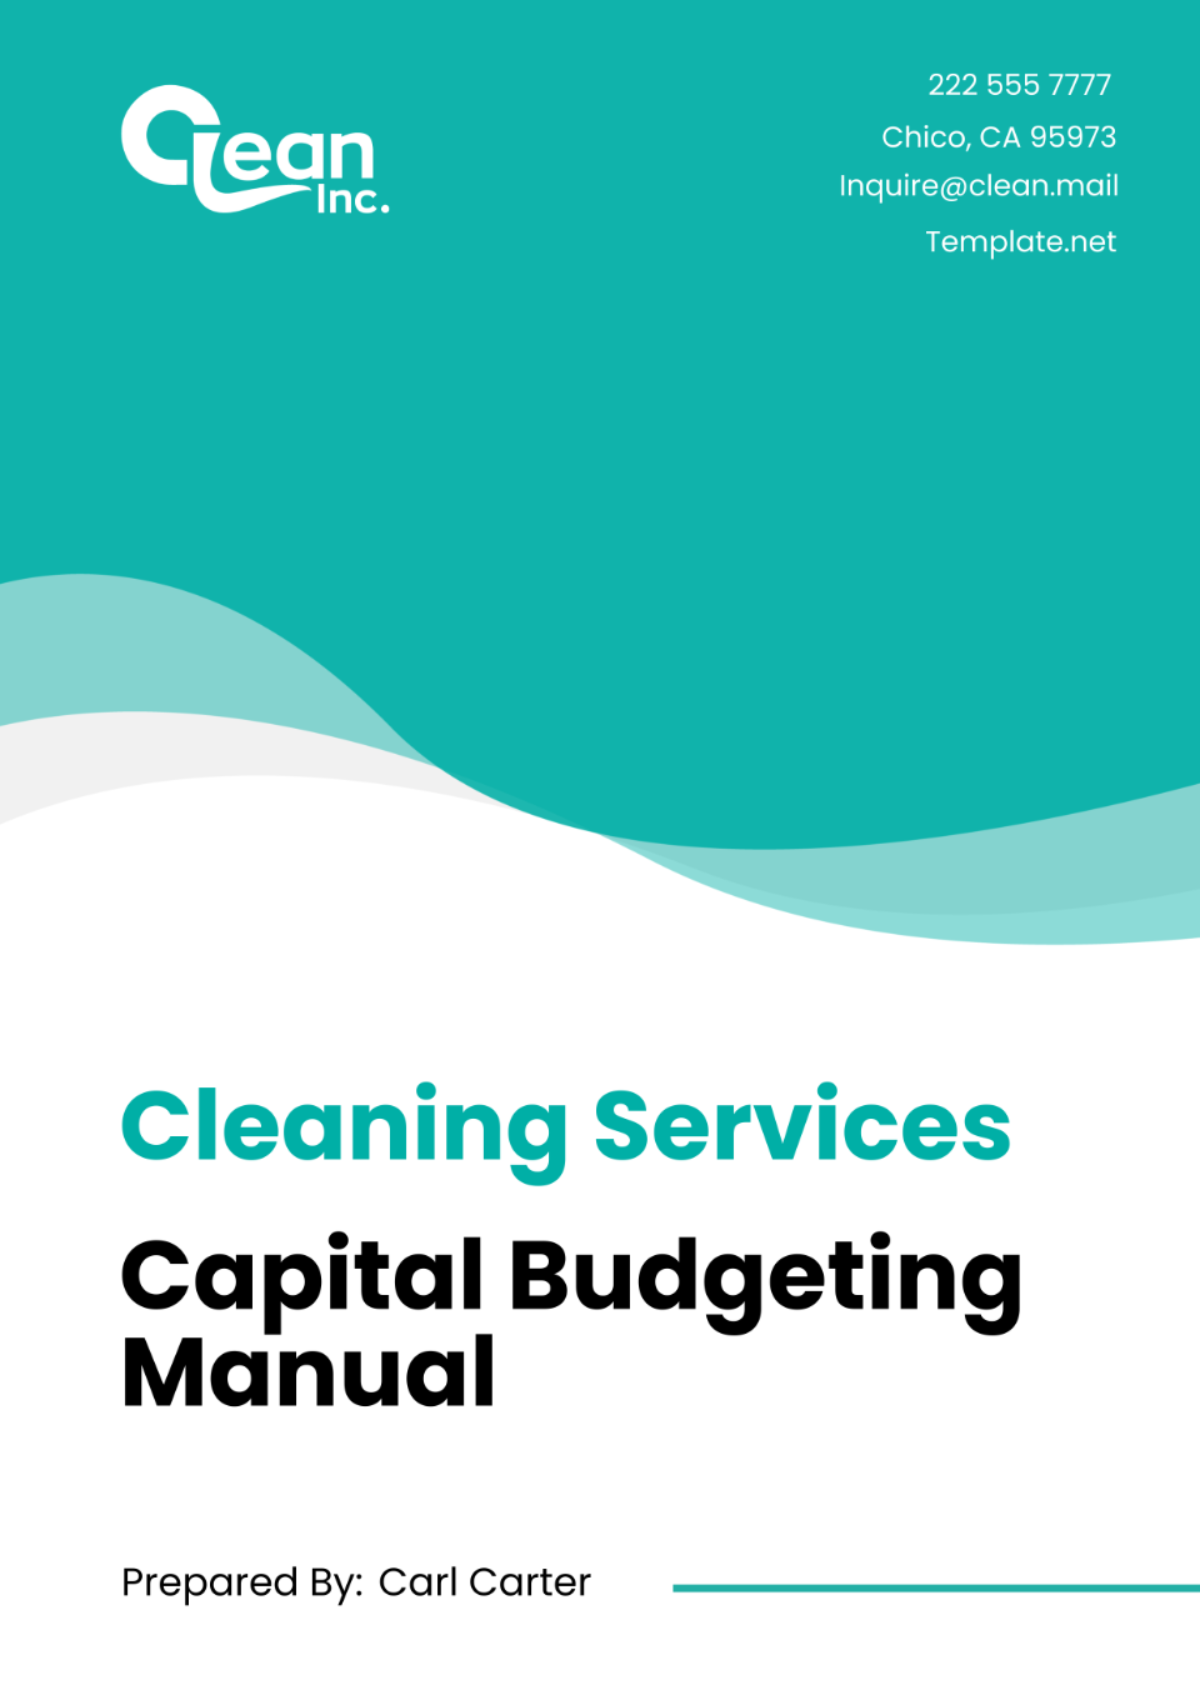 Cleaning Services Capital Budgeting Manual Template